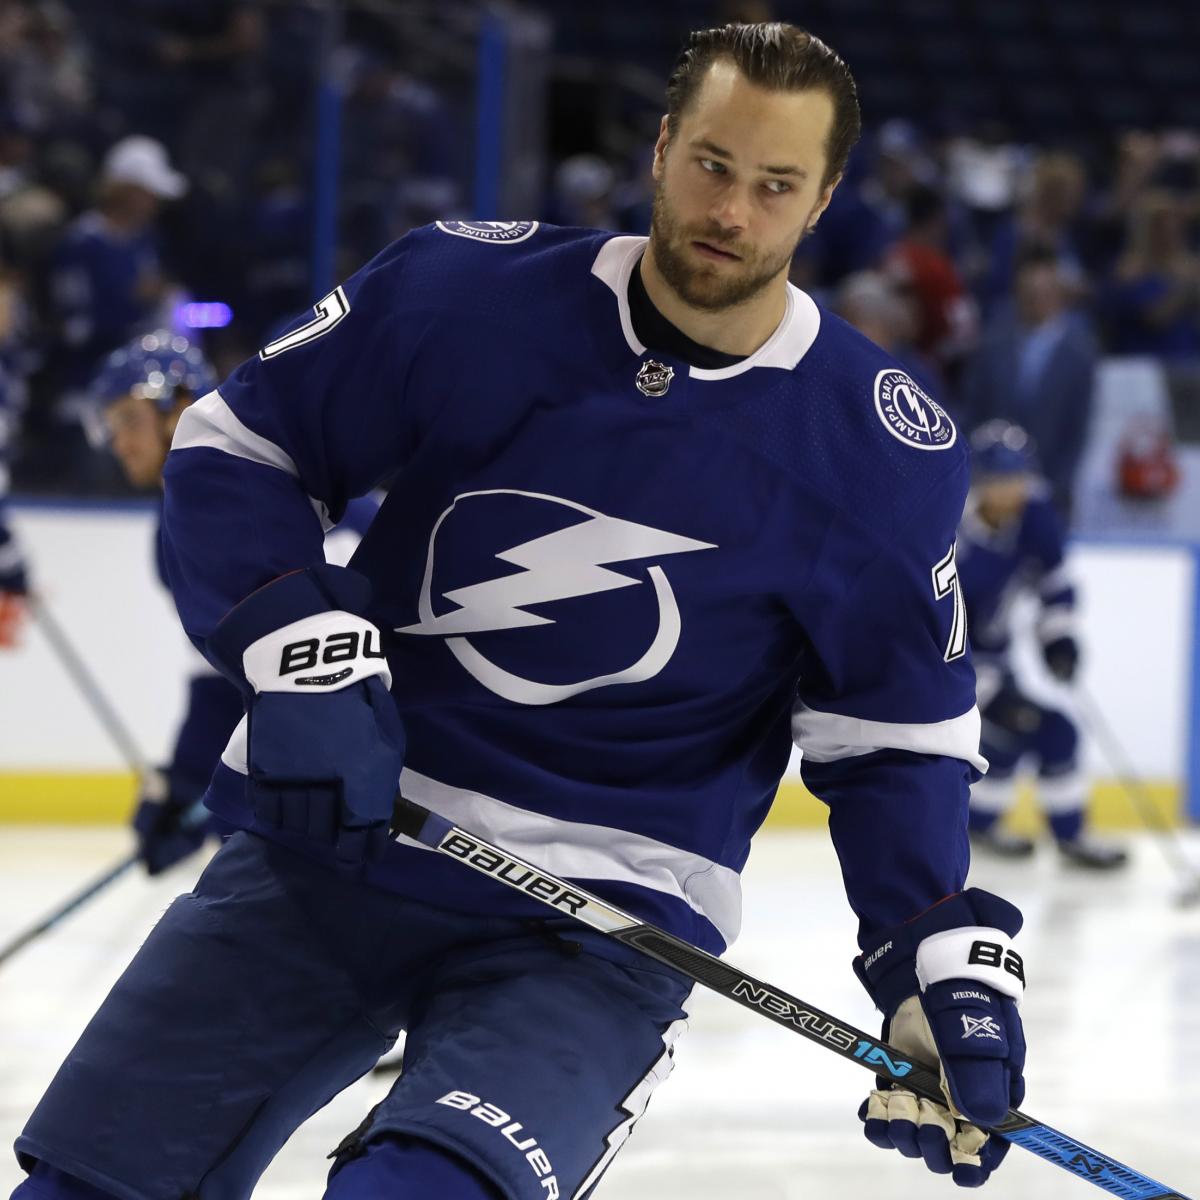 Behind the workouts that were a 'game-changer' for the Lightning's Victor  Hedman - The Athletic